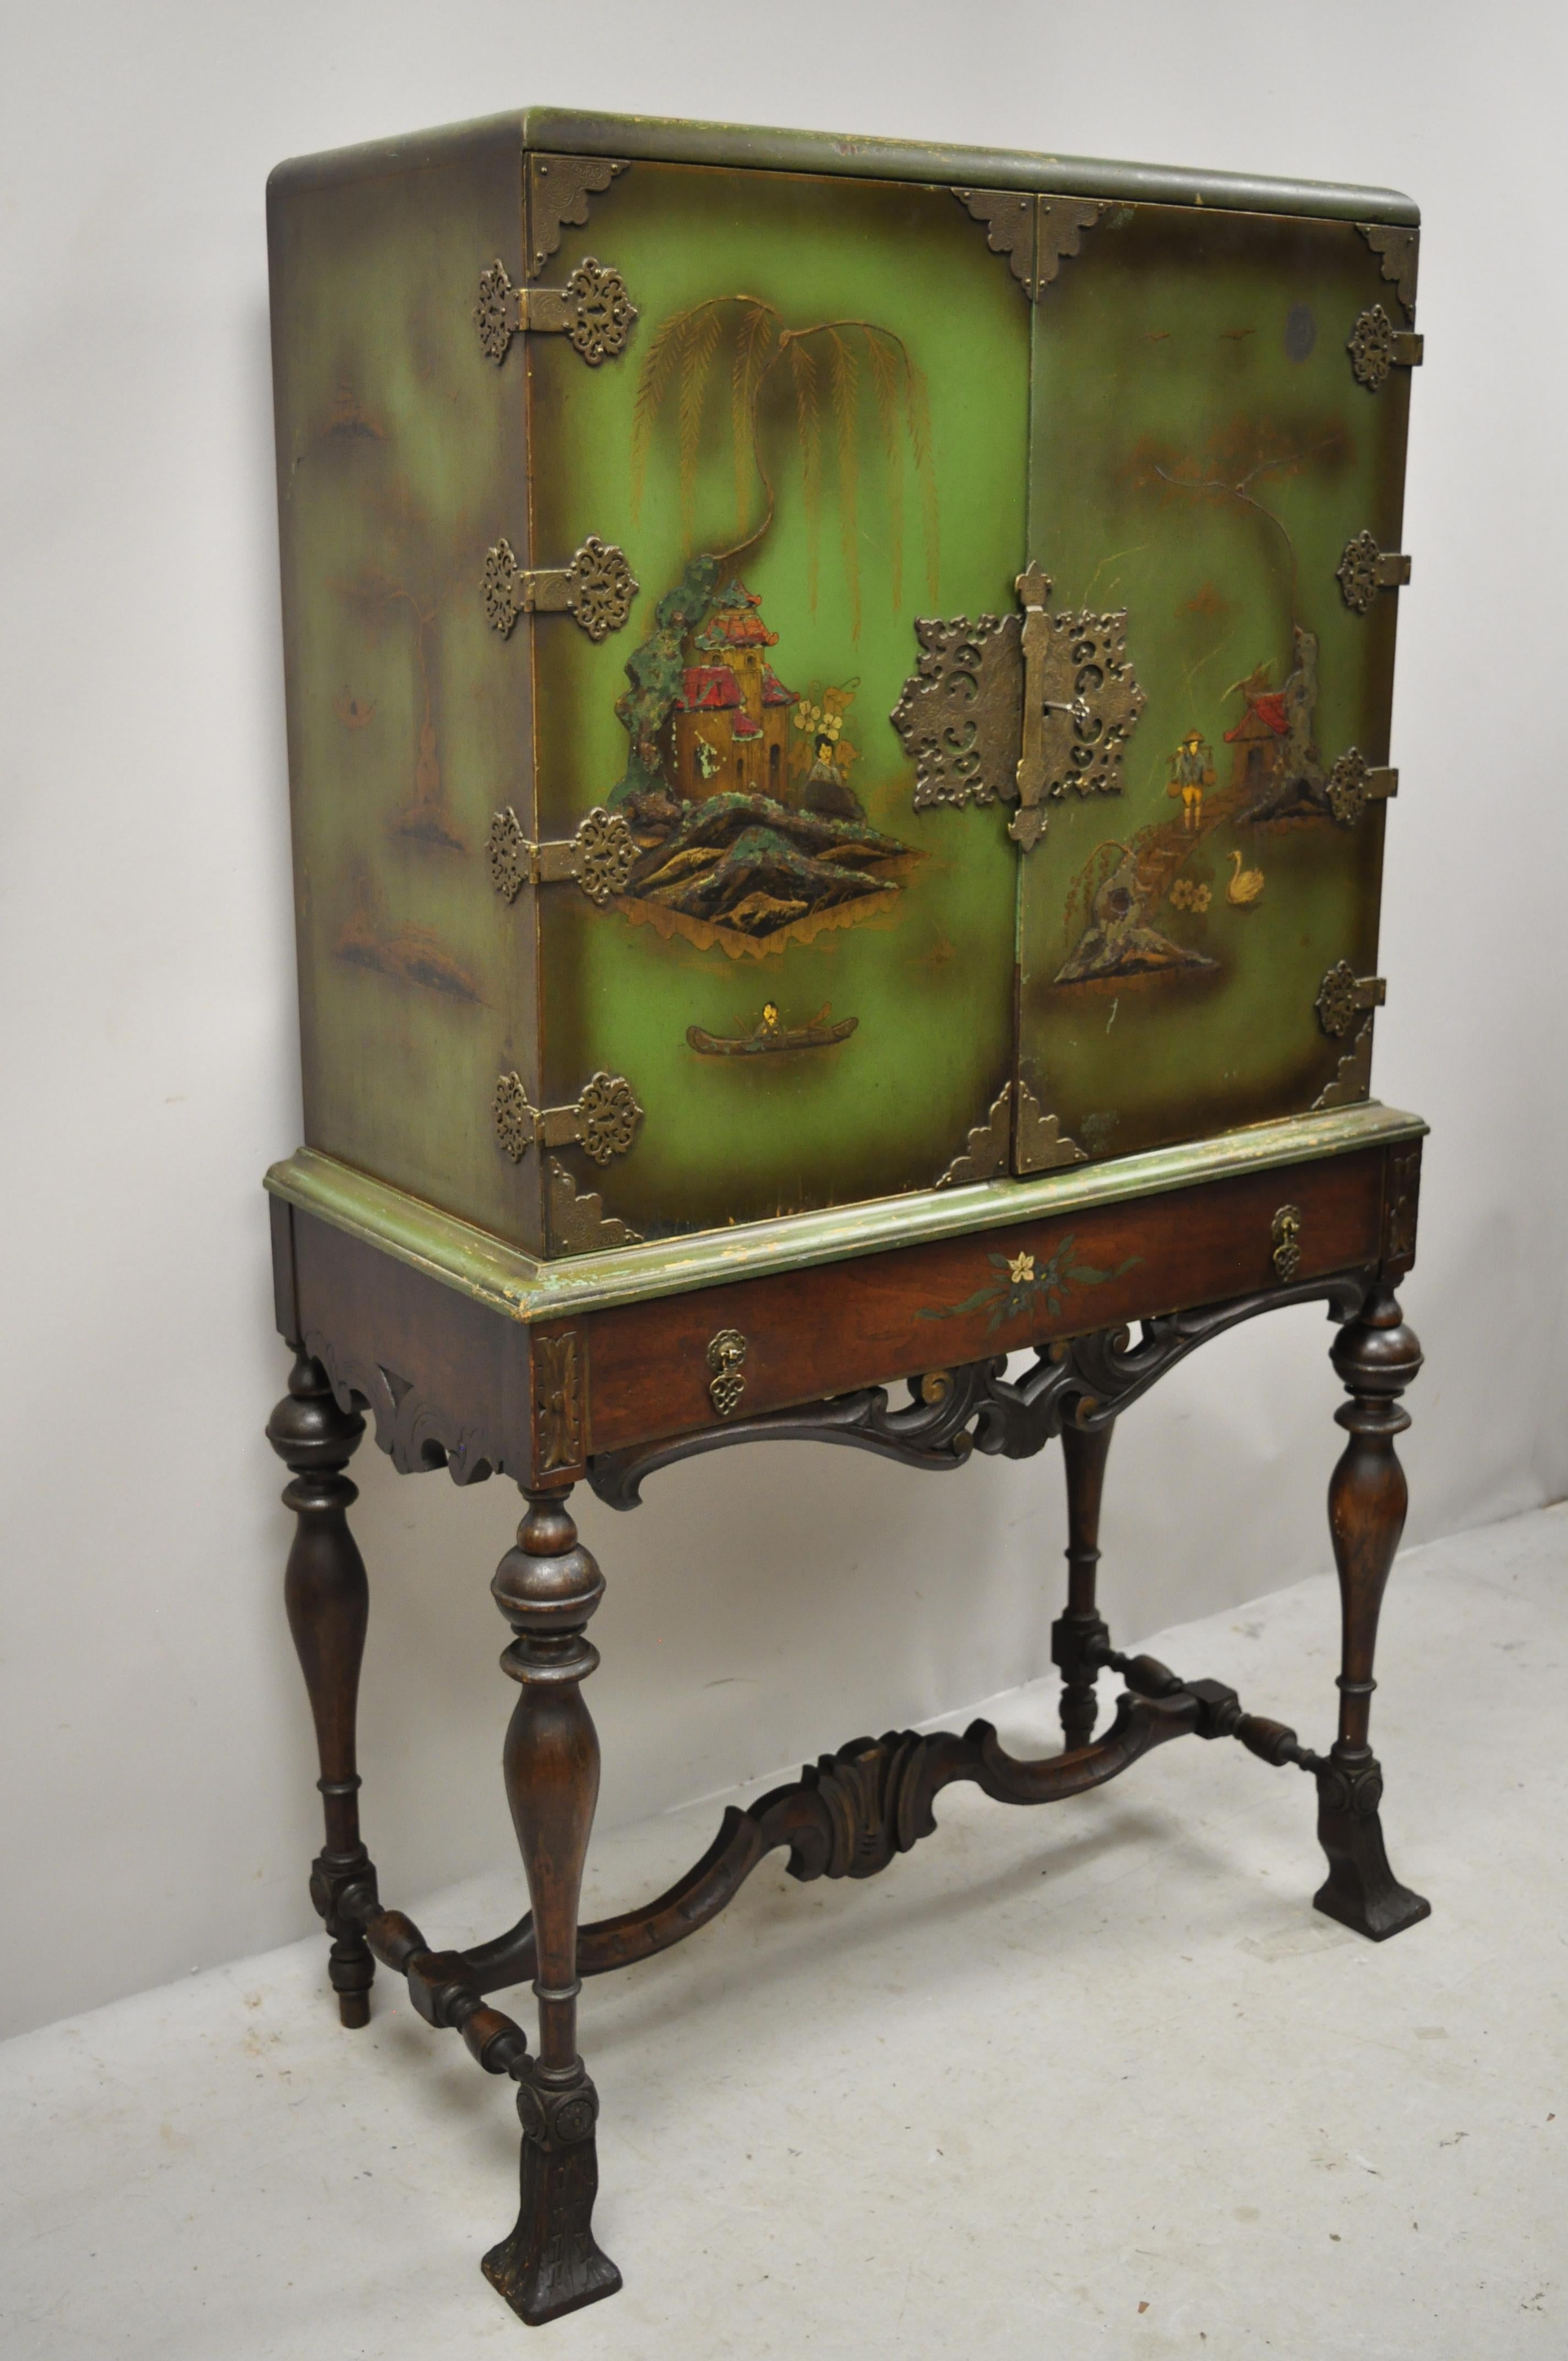 Antique chinoiserie English Georgian green figural oriental painted China cabinet. Item features hand painted oriental scenes, distressed finish, nicely carved details, 2 swing doors, 1-drawer, 2 wooden shelves, solid brass hardware, circa early